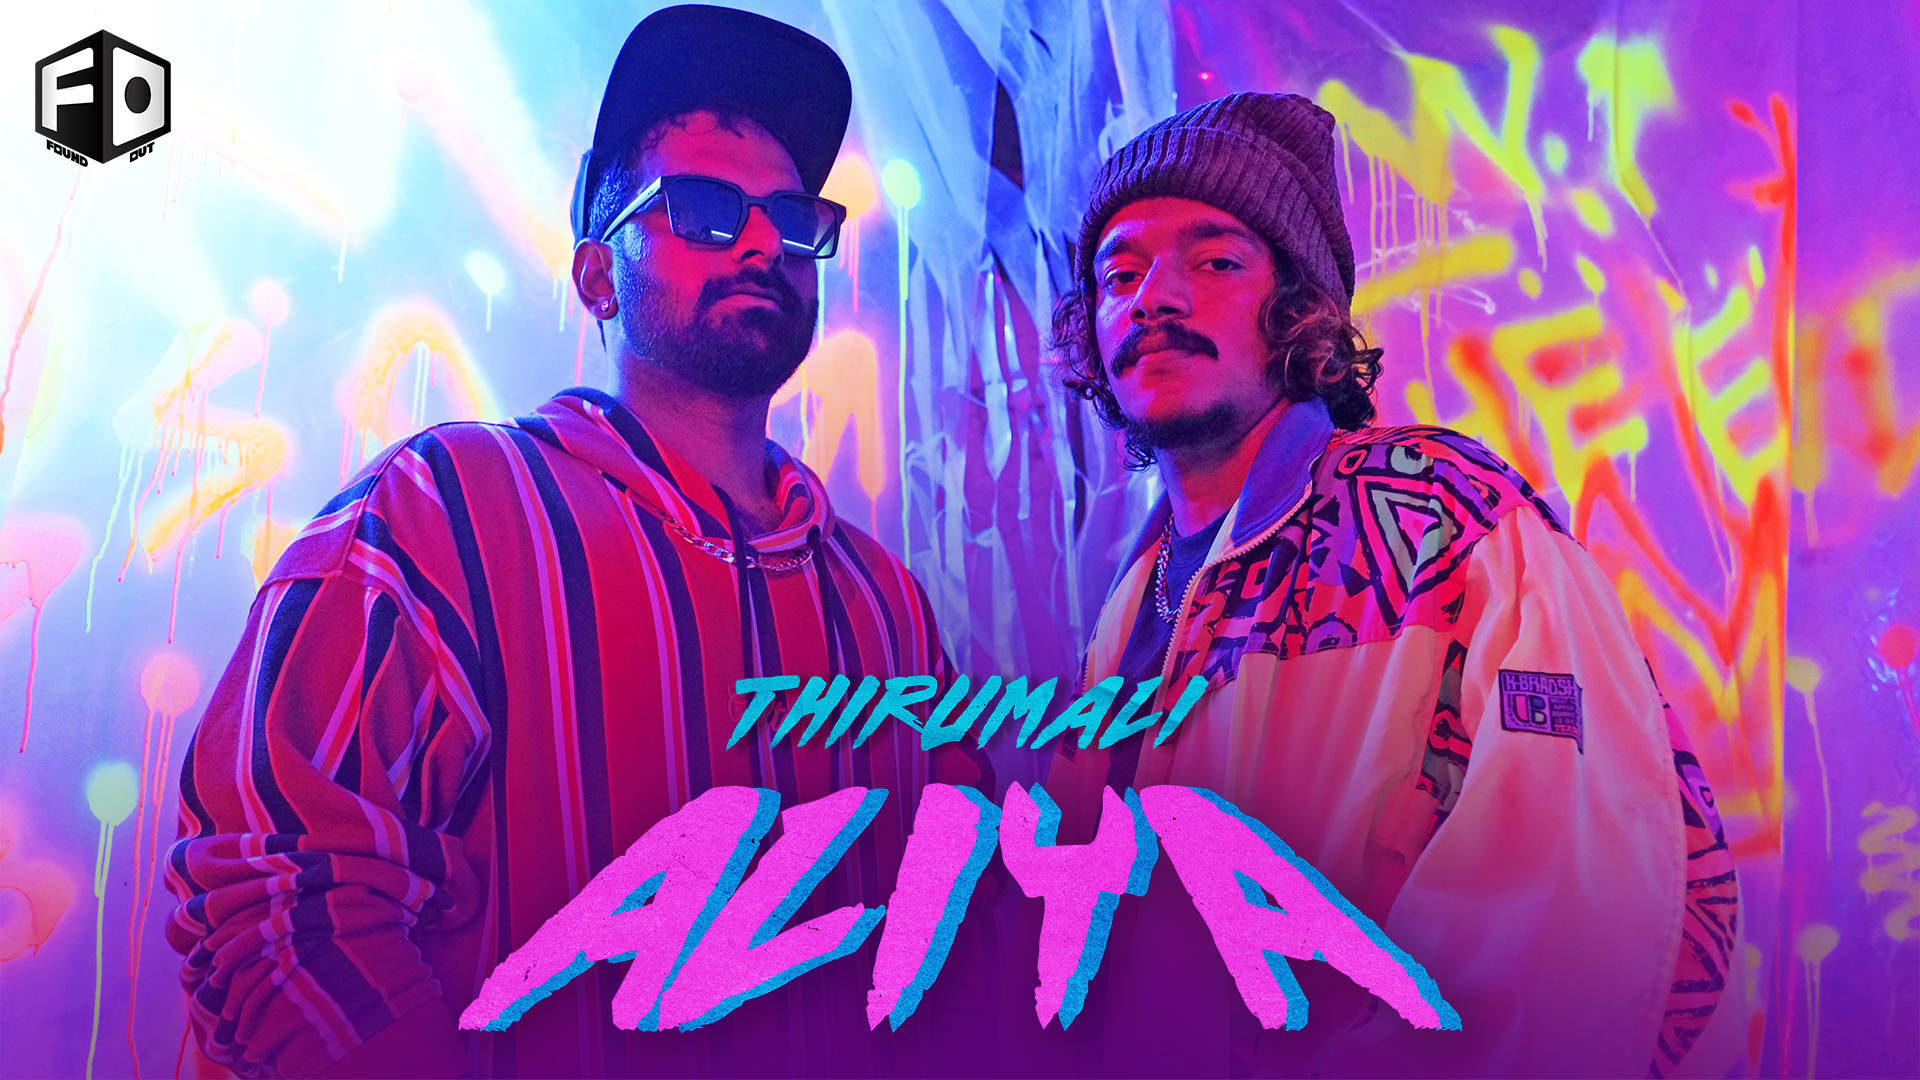 KERALA’S HIP HOP PIONEER THIRUMALI RELEASES A PARTY SONG ‘ALIYA’ WITH FOUND OUT RECORD